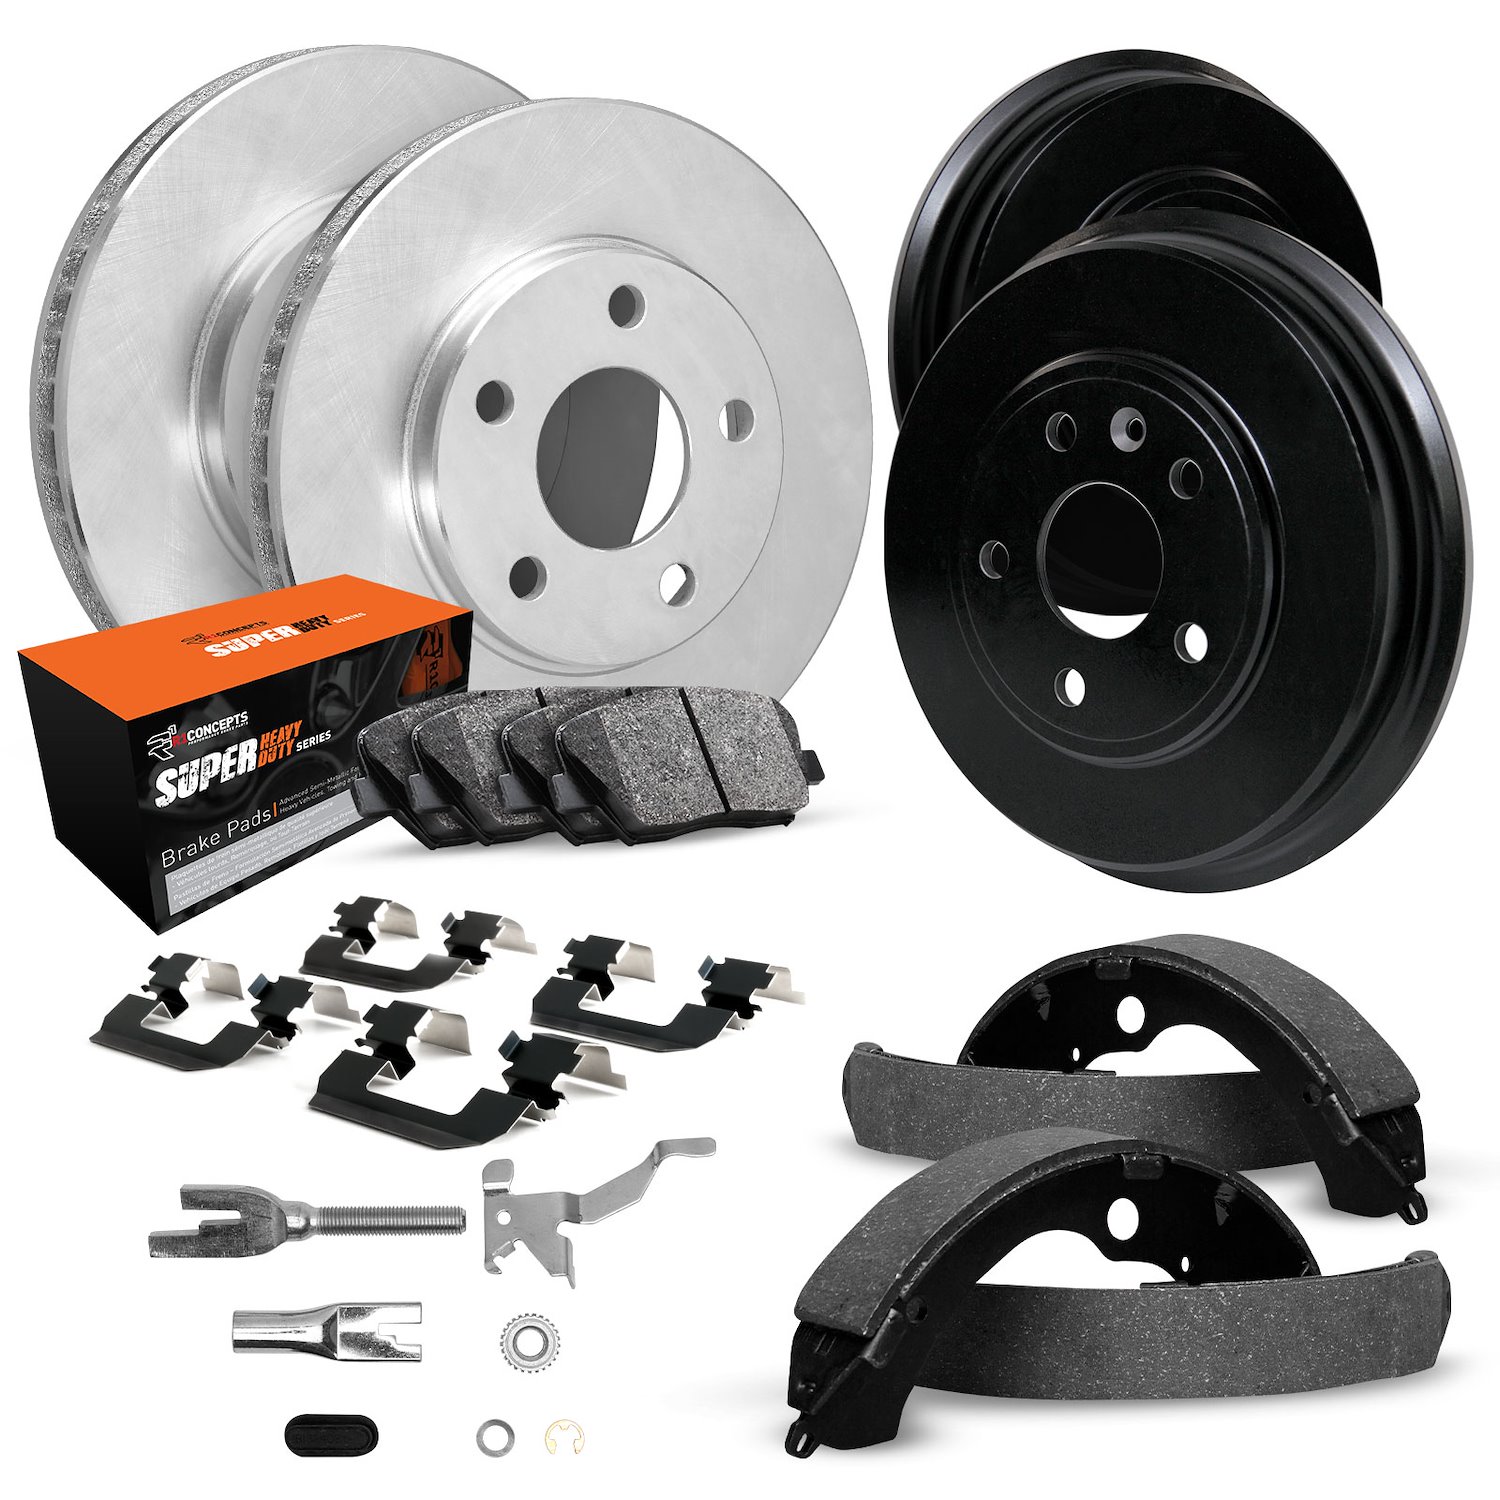 E-Line Blank Brake Rotor & Drum Set w/Super-Duty Pads, Shoes, Hardware, & Adjusters, 1991-1996 GM, Position: Front & Rear